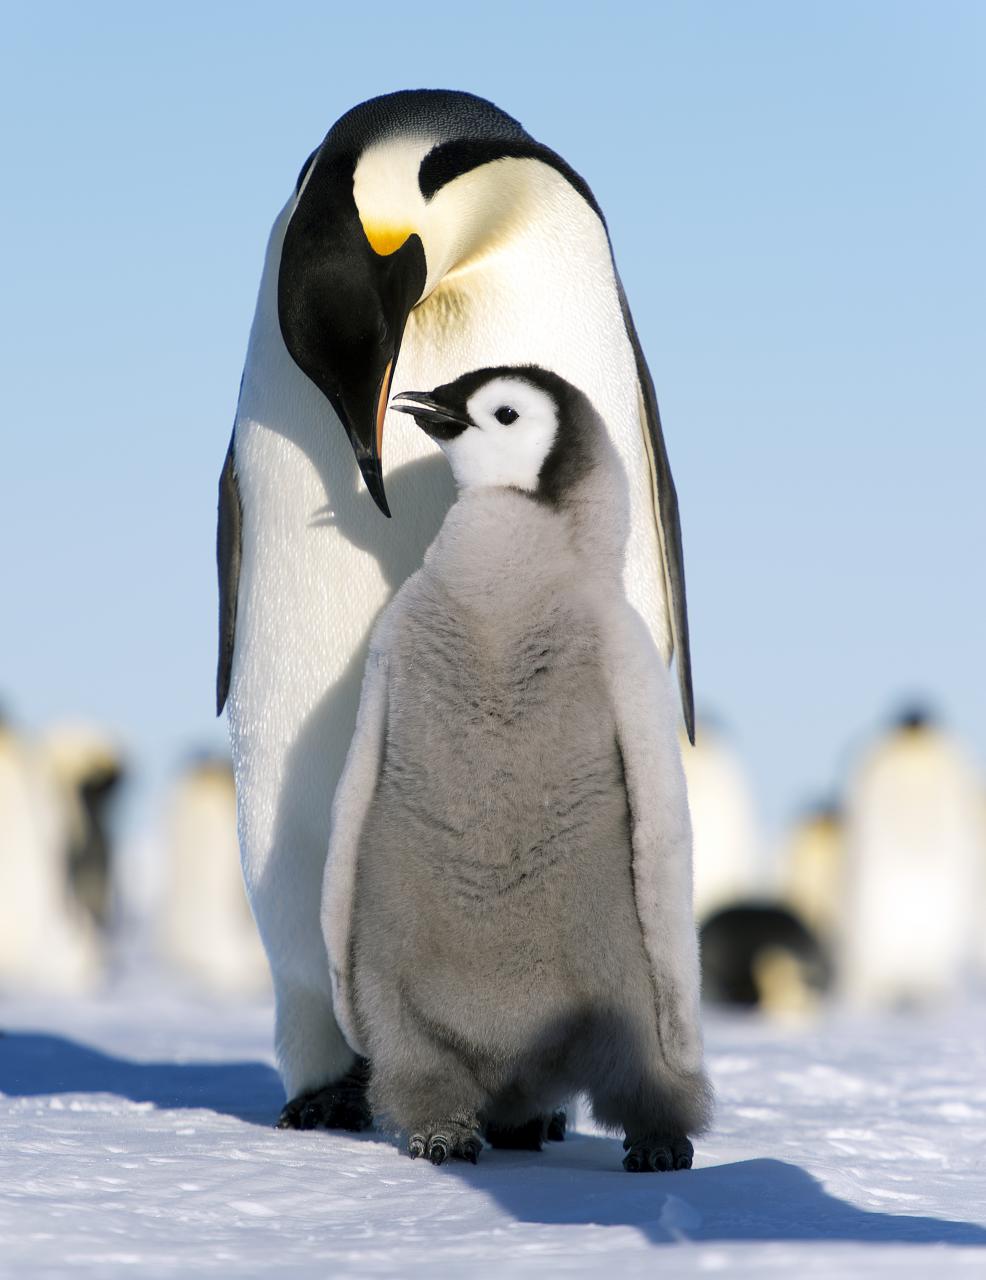 a baby penguin standing next to a large penguin